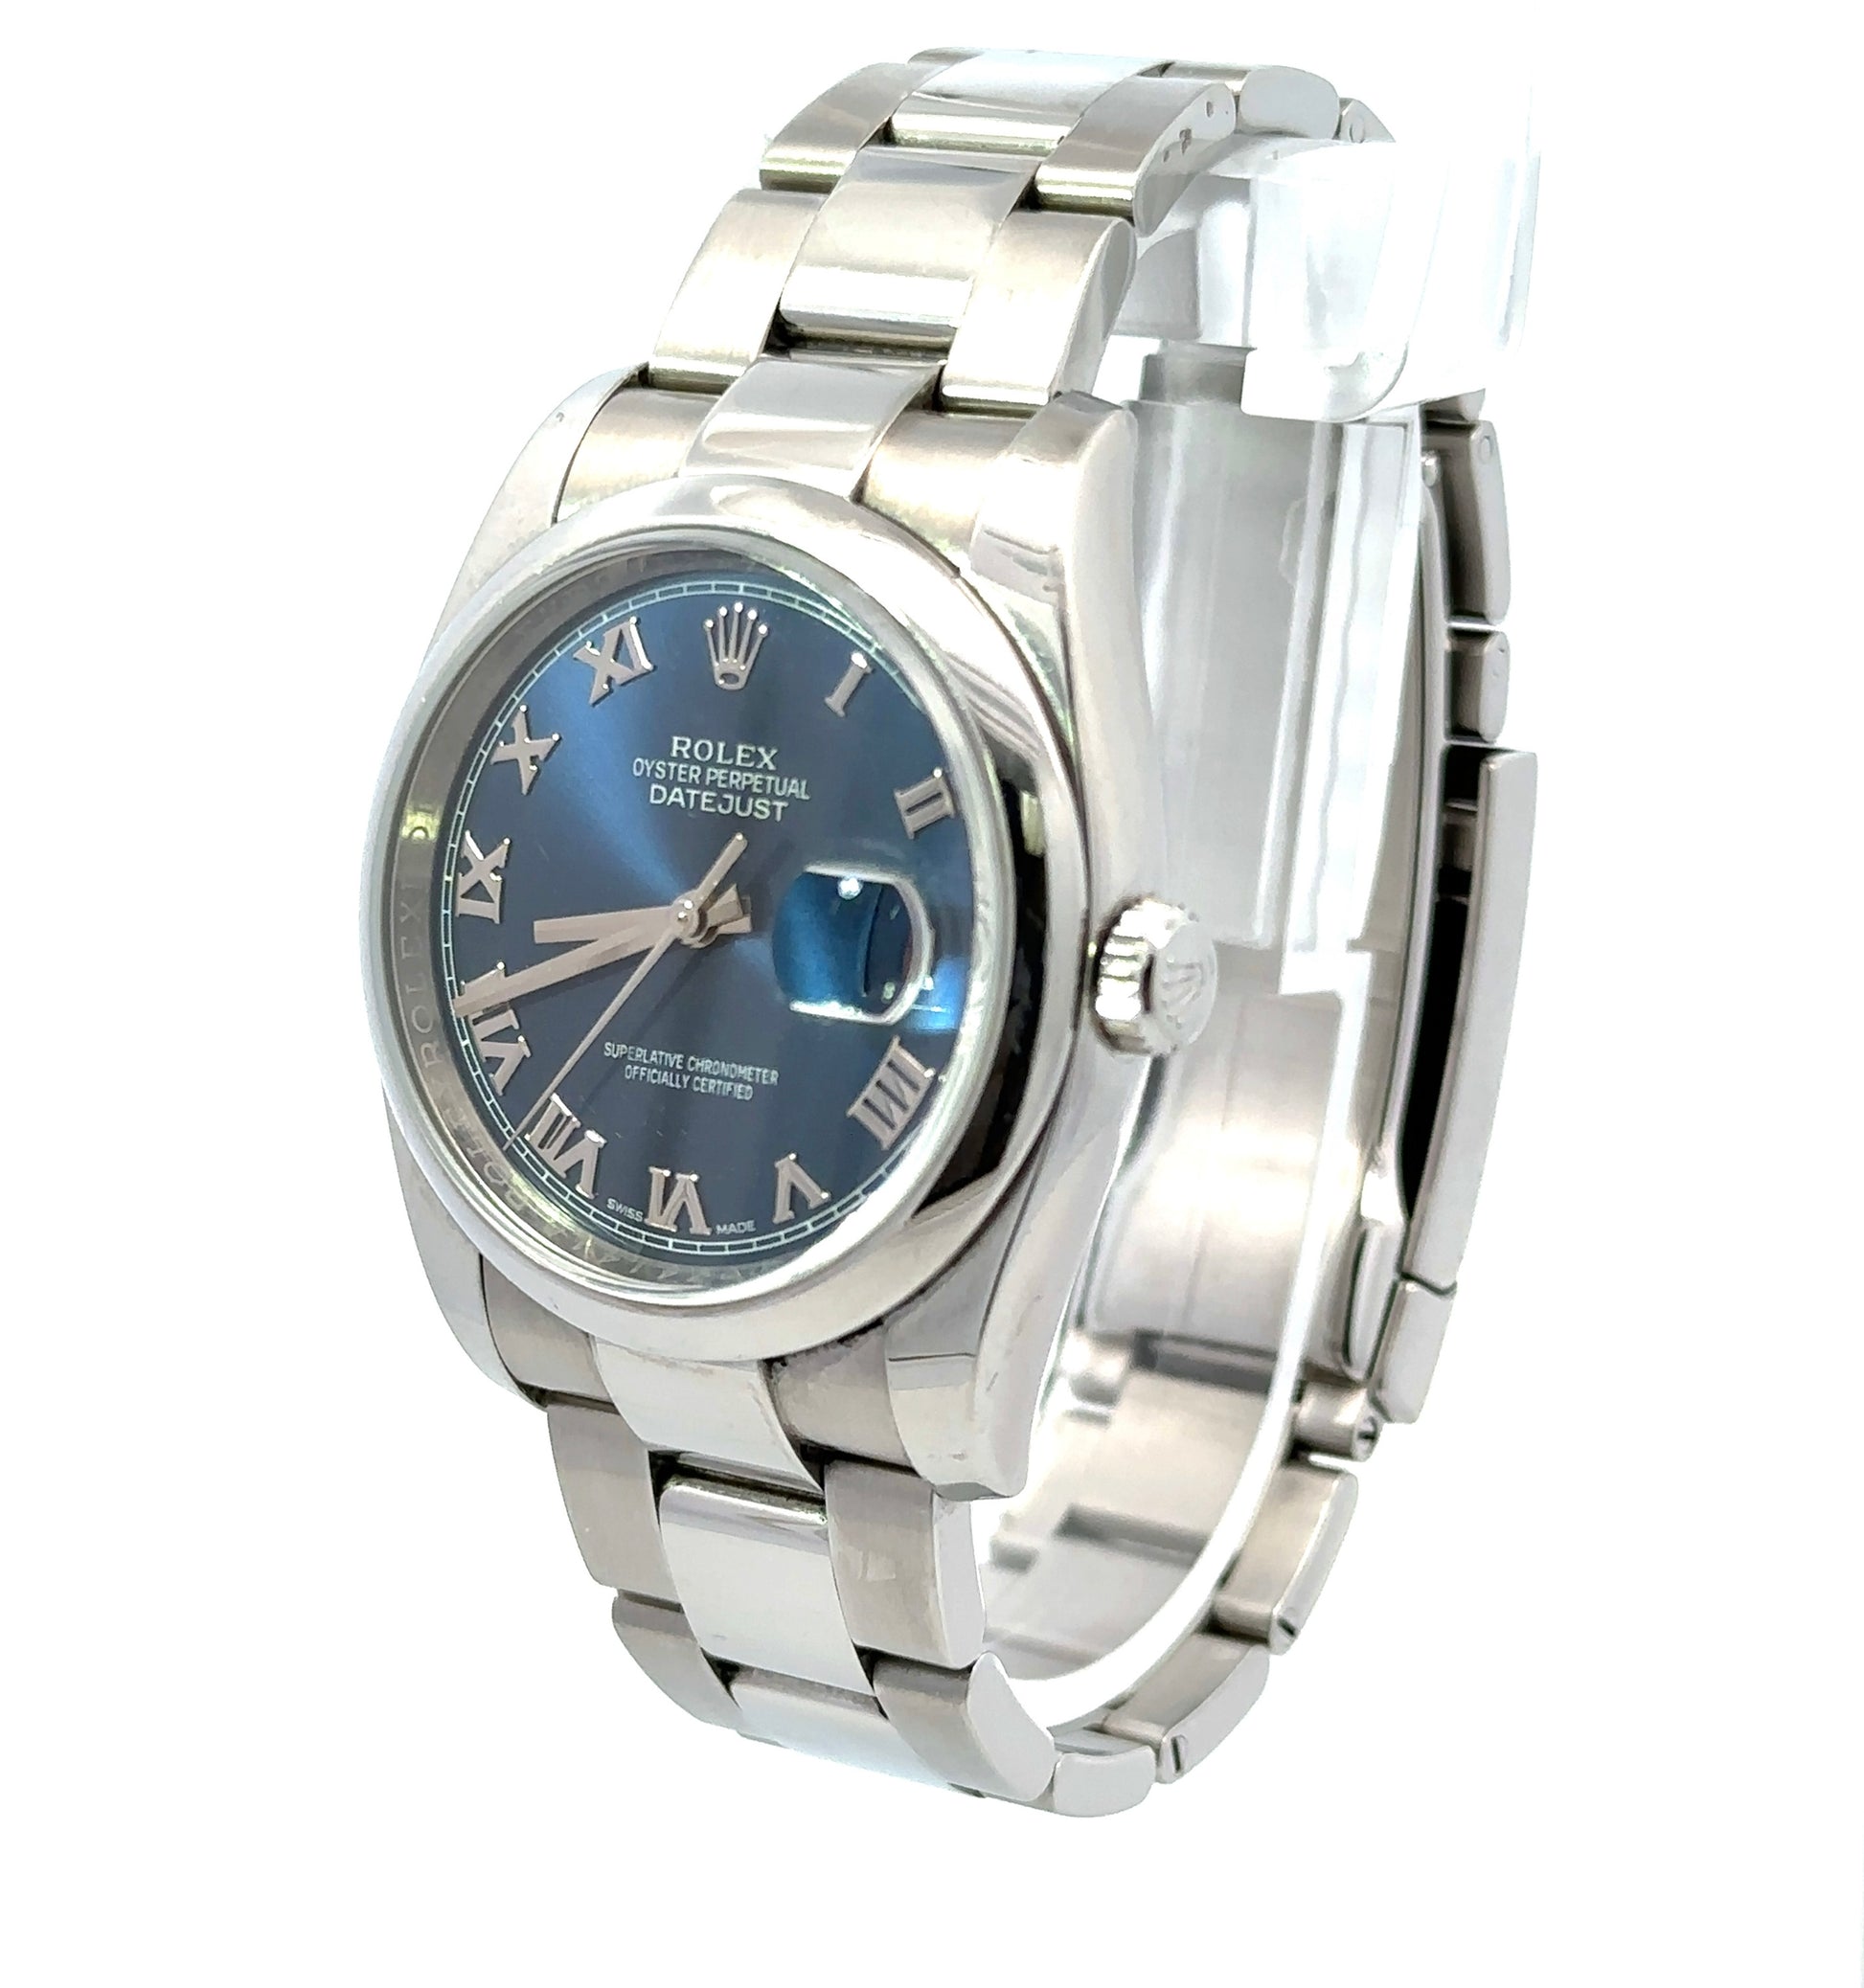 Diagonal view of stainless steel rolex with smooth bezel, oyster band, and blue roman numeral dial